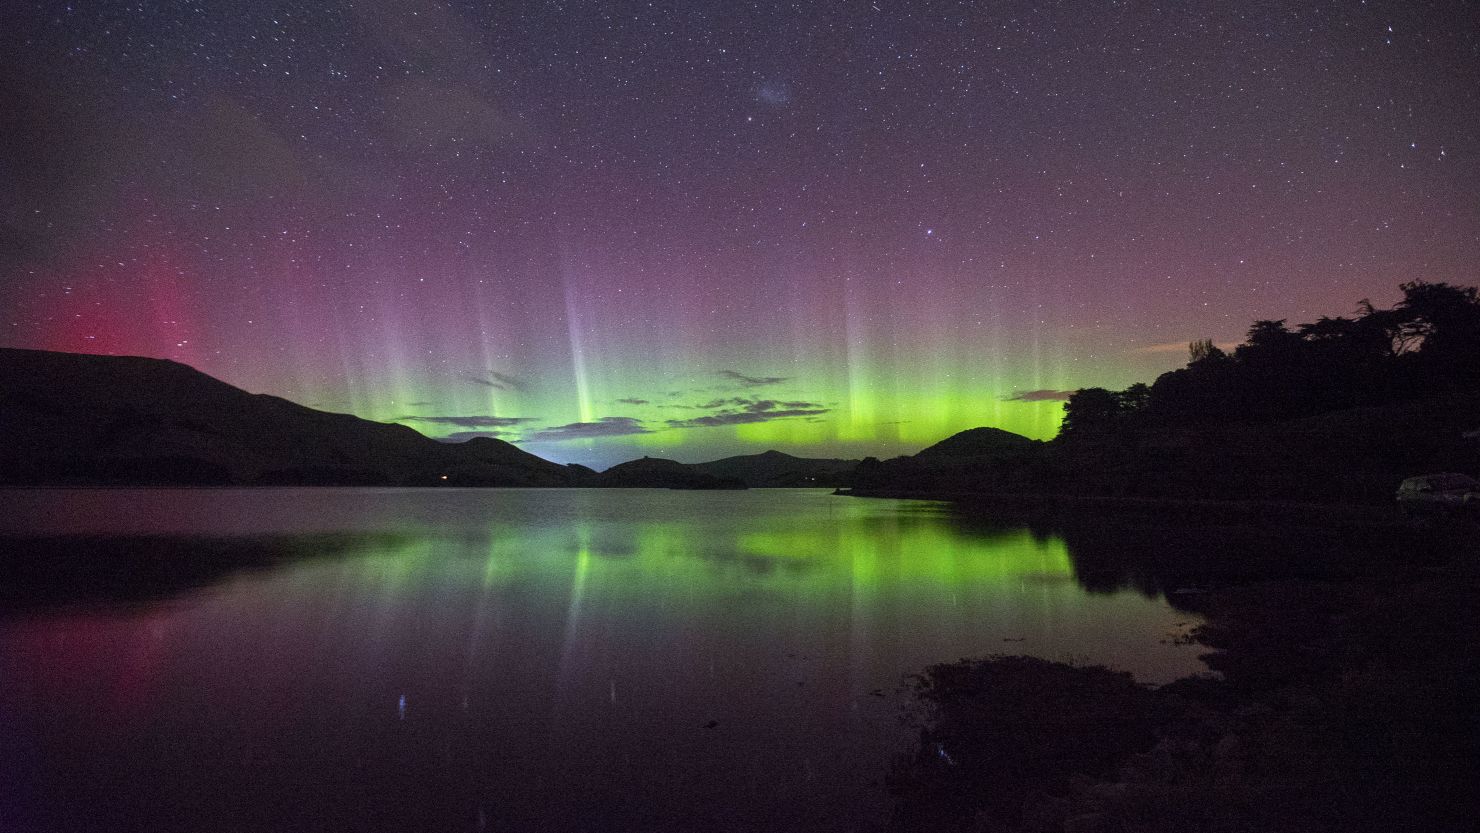 The Aurora Australis is like the northern lights but in the southern hemisphere.